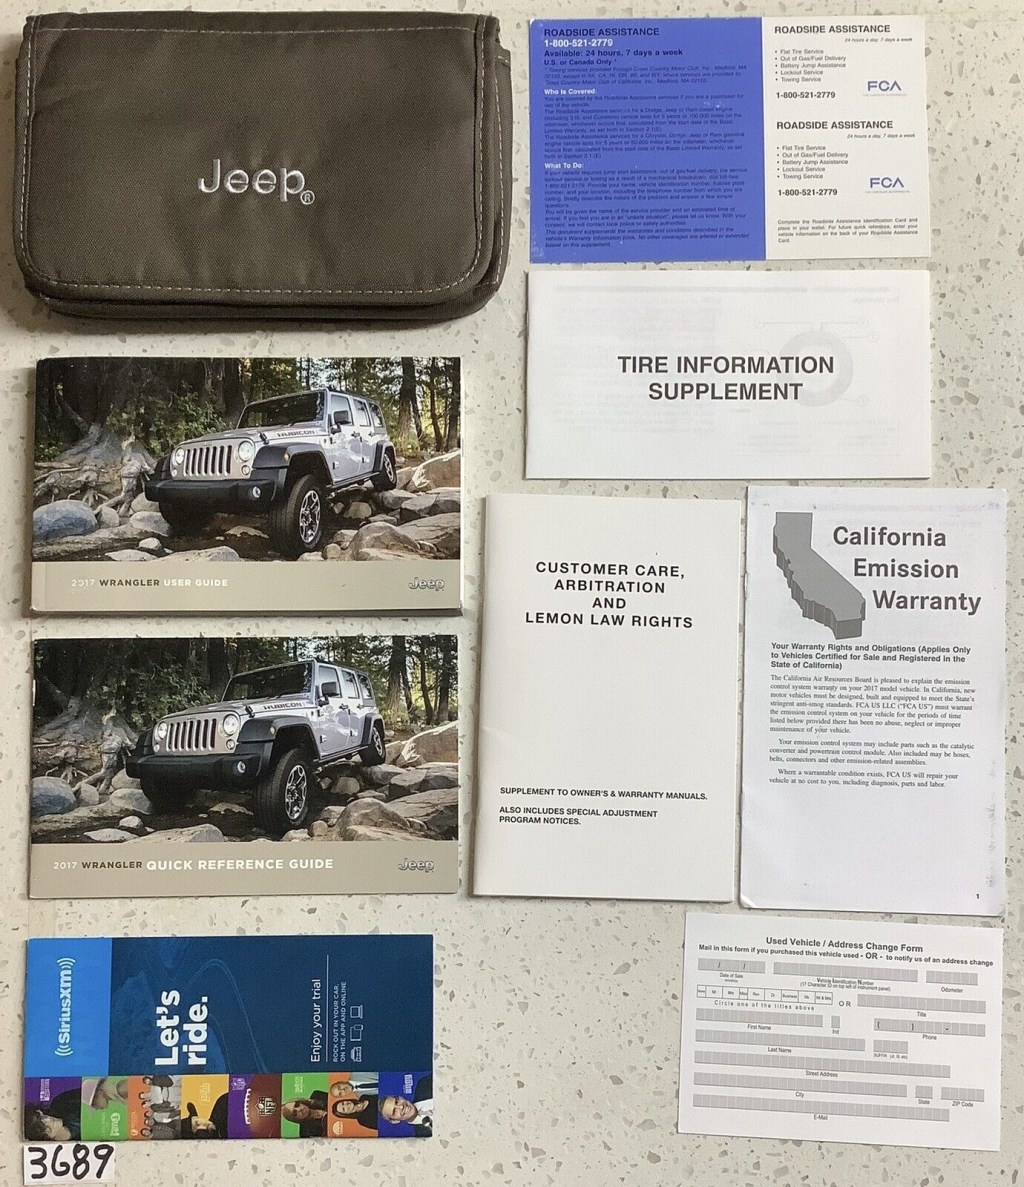 Picture of: JEEP WRANGLER USER GUIDE/OWNERS MANUAL OPERATORS USER GUIDE BOOK SET   eBay